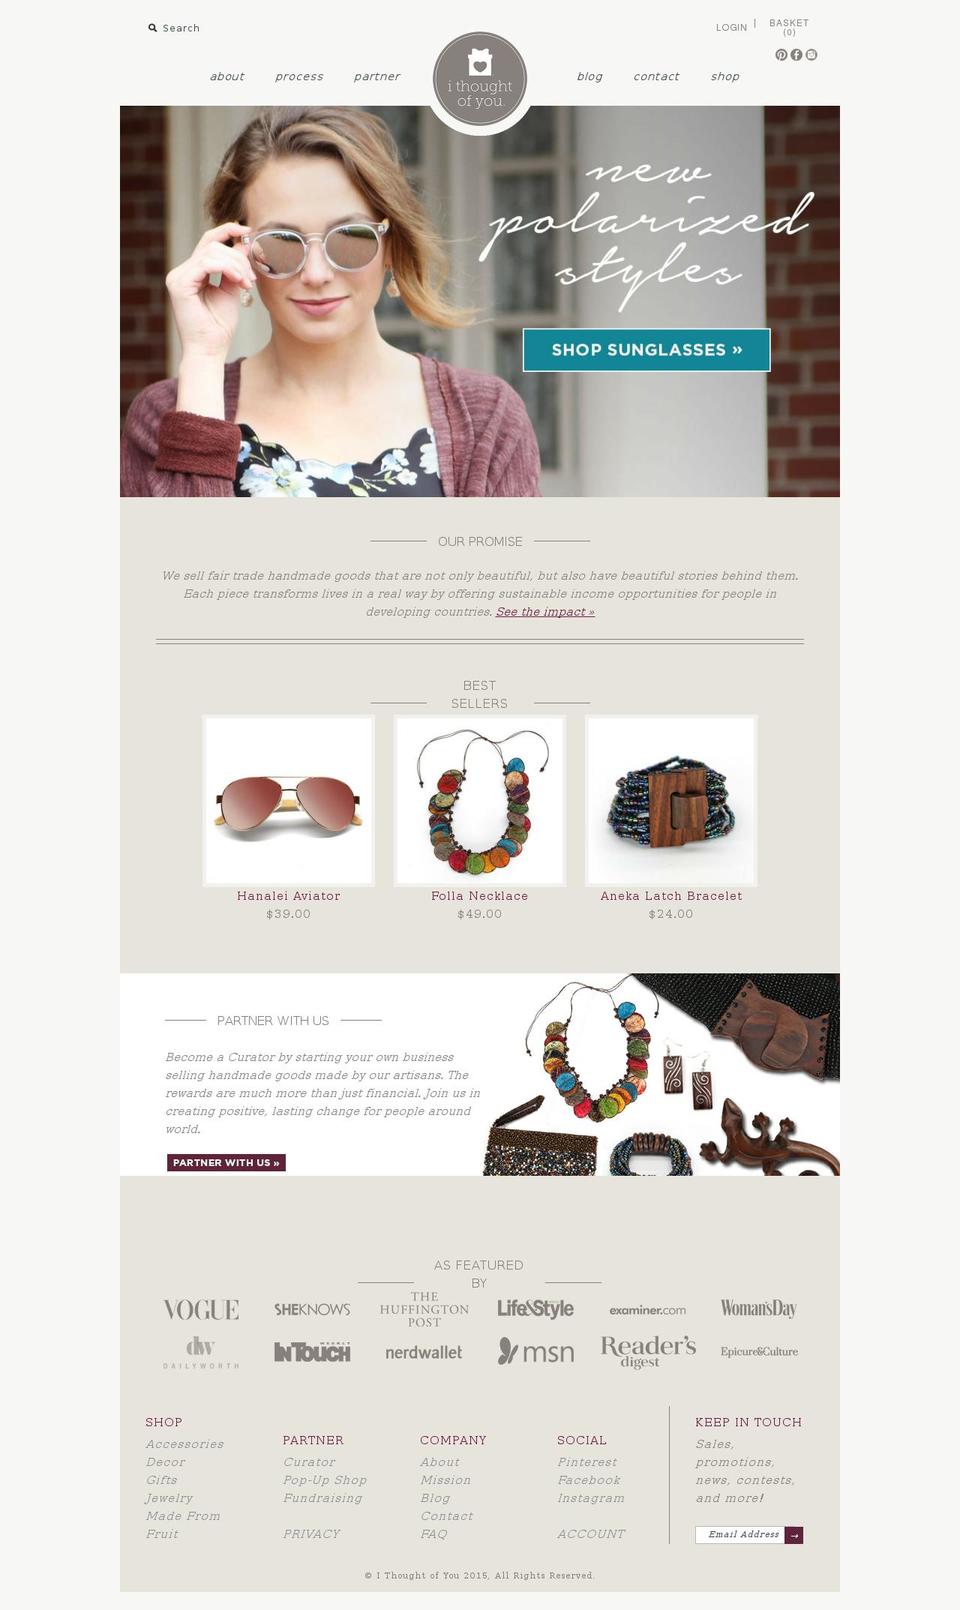 Theme Shopify theme site example madefromflowers.com